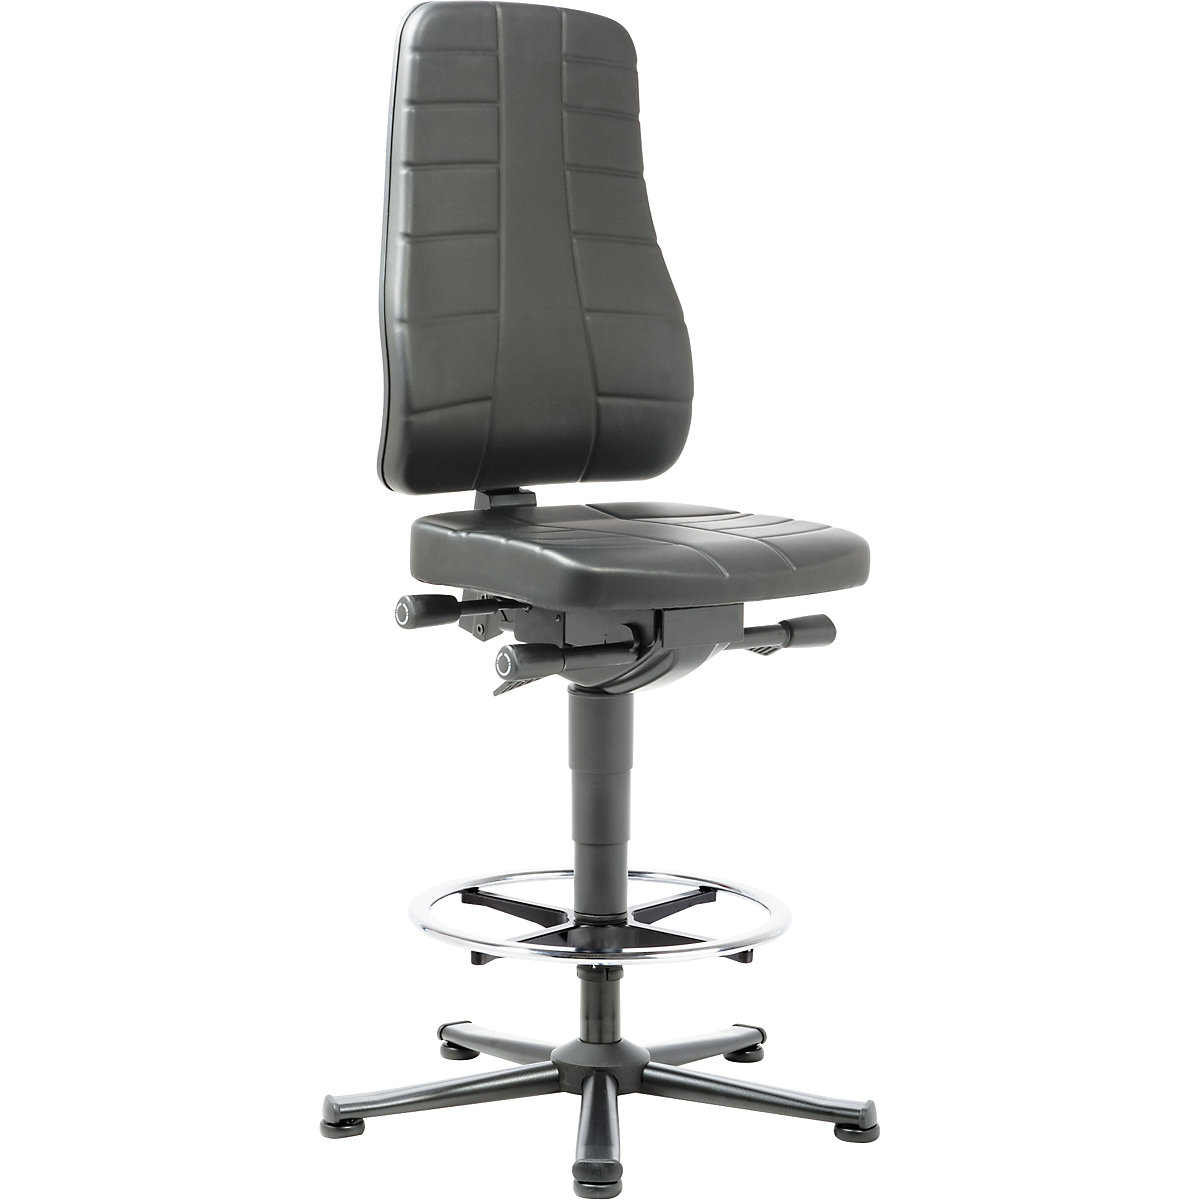 All-in-one industrial swivel chair – bimos